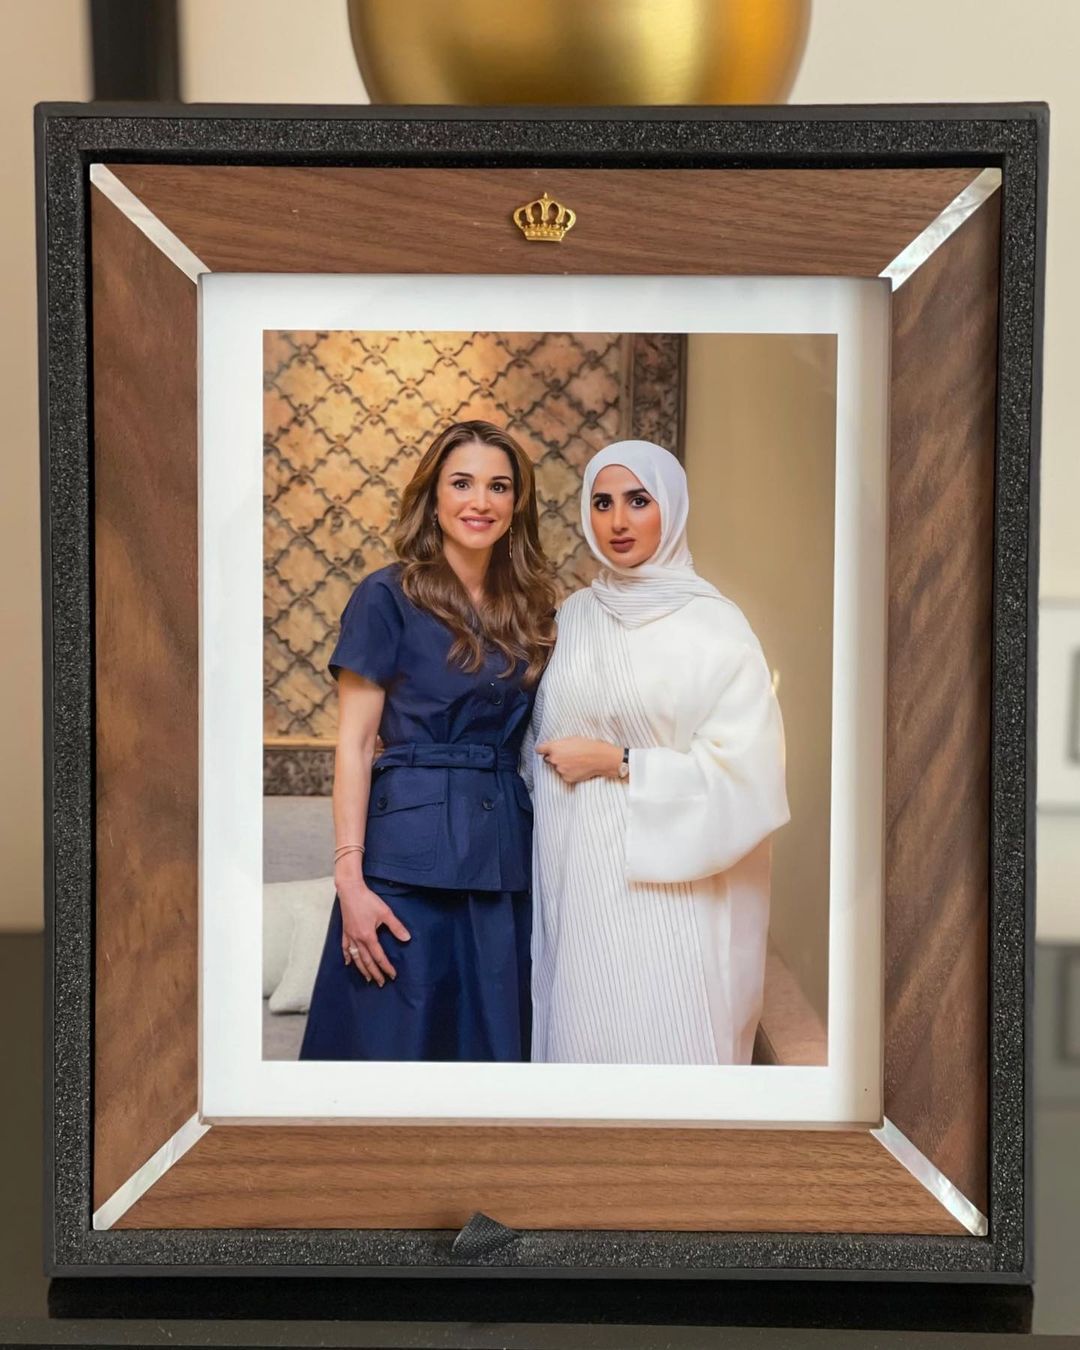 , Queen Rania met with the a group of Arab influencers and media personalities in Amman.